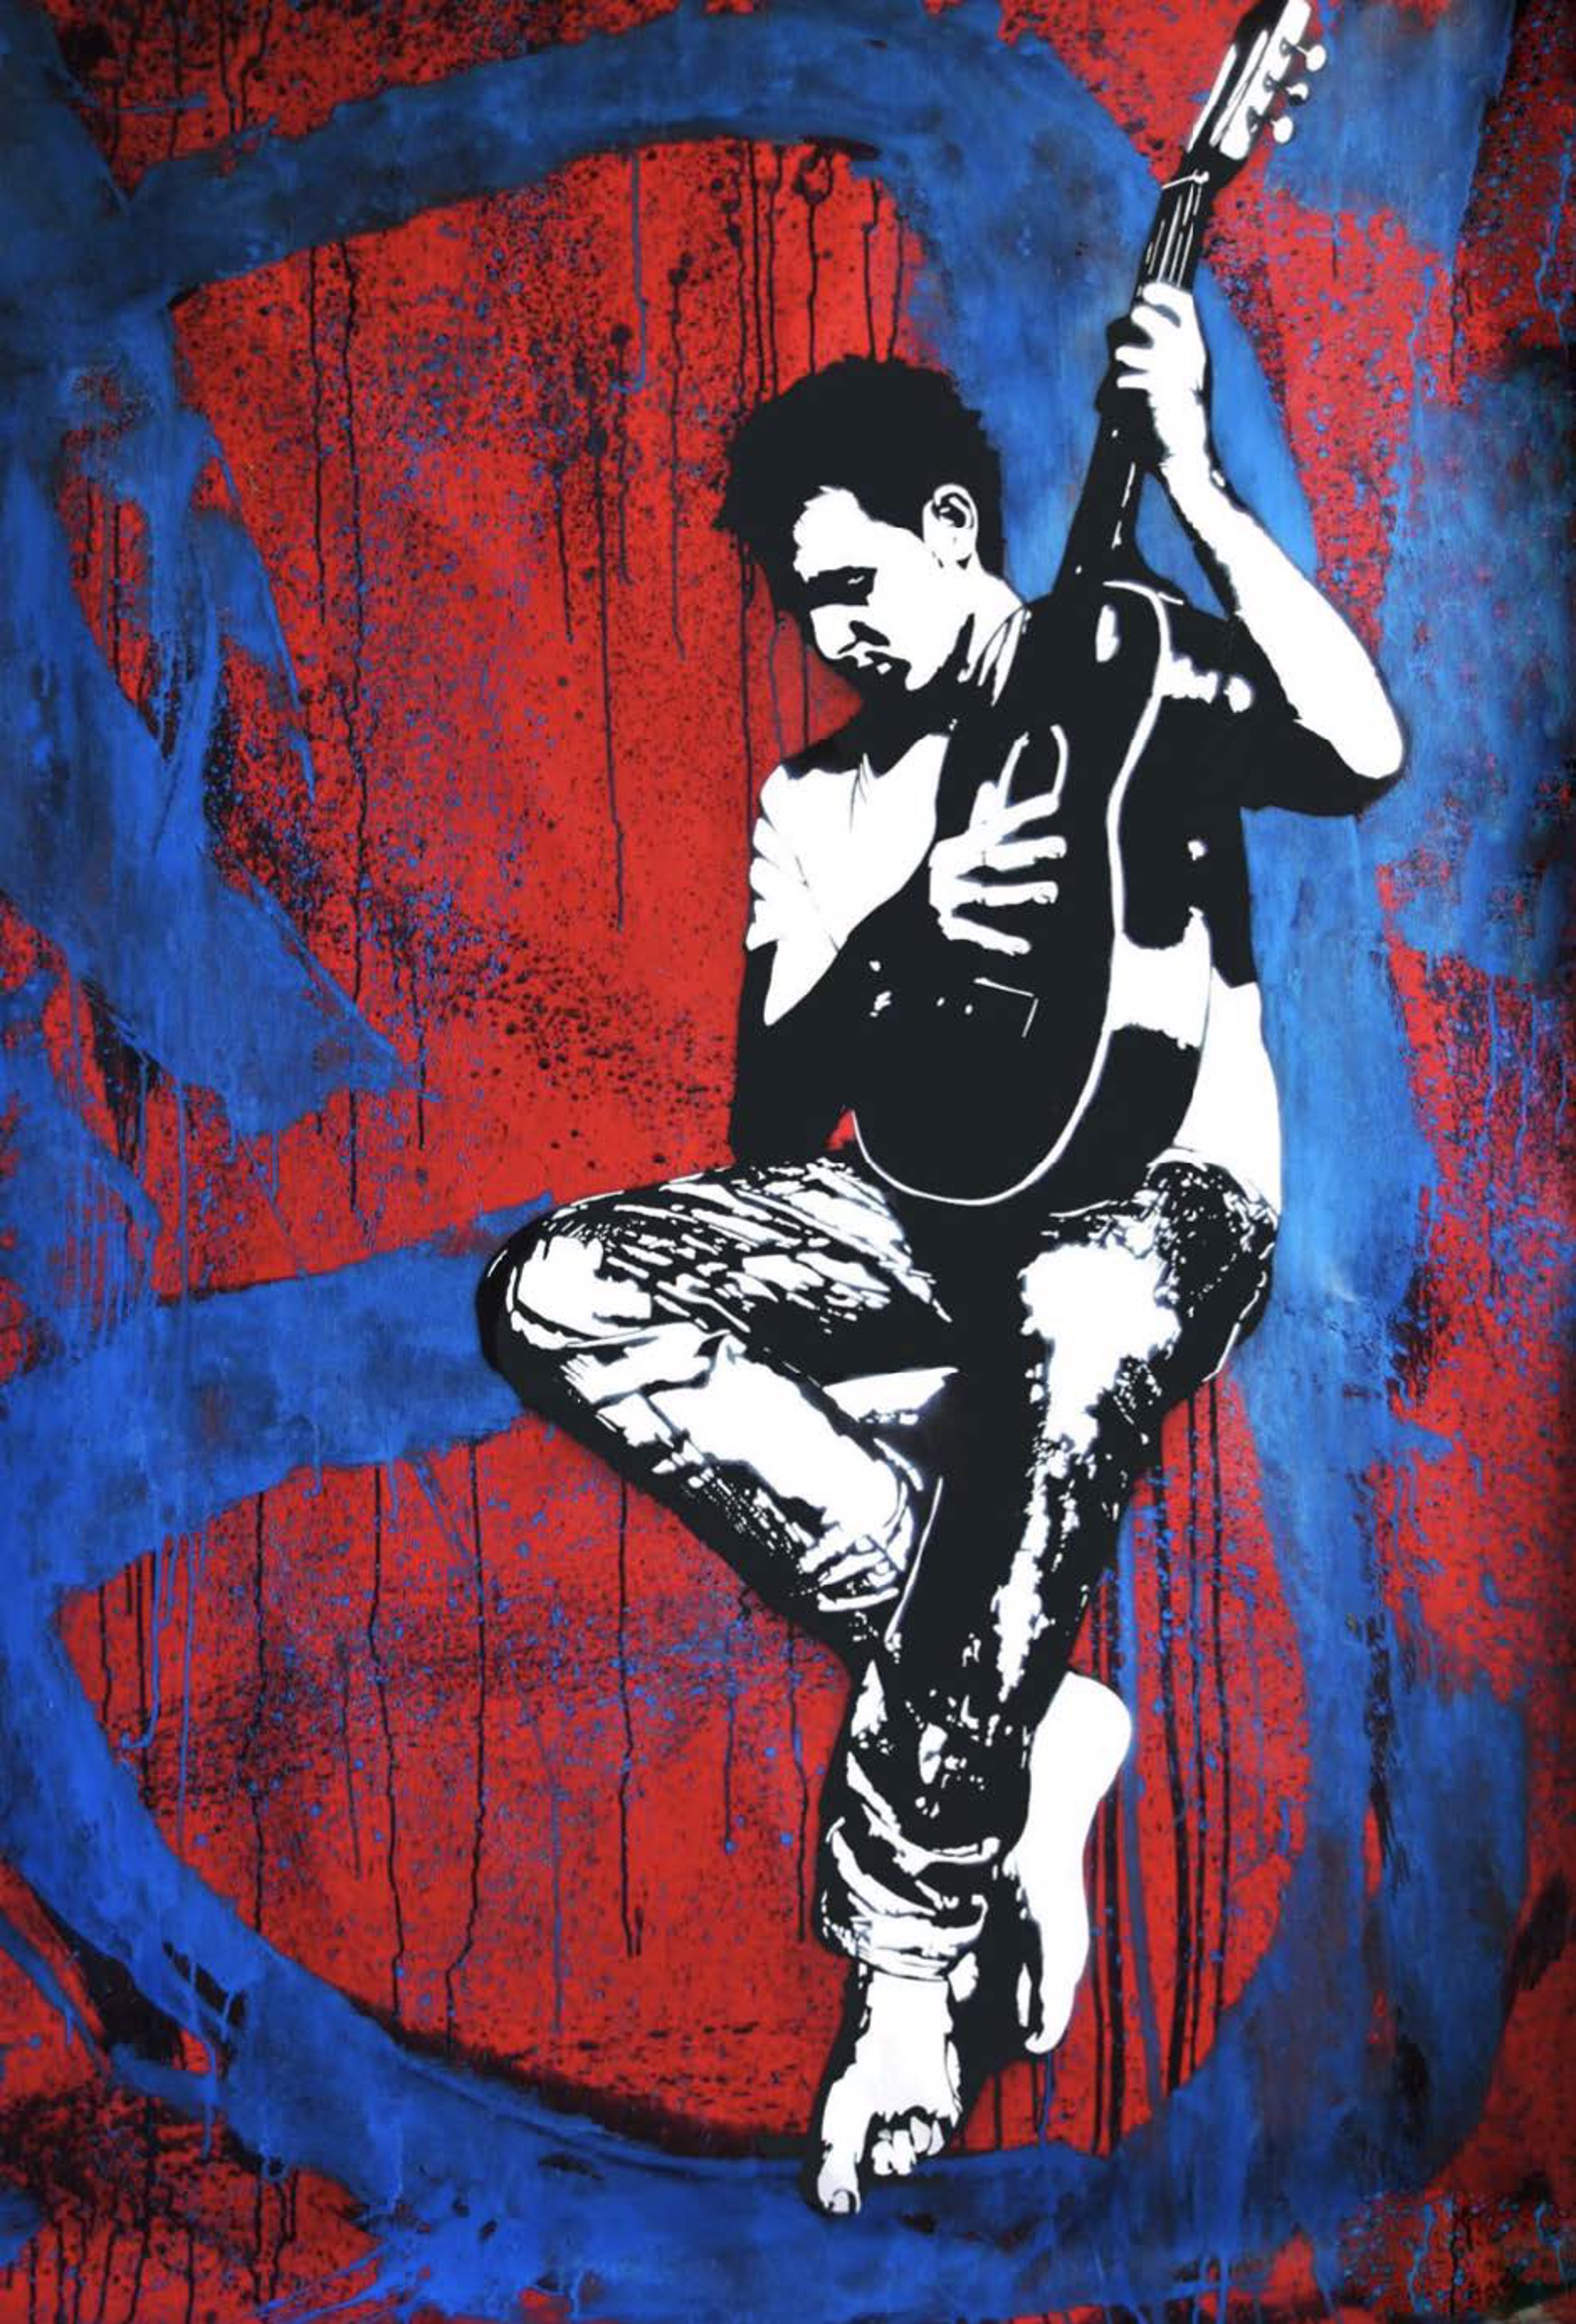 Music to Live 1 by Blek le Rat